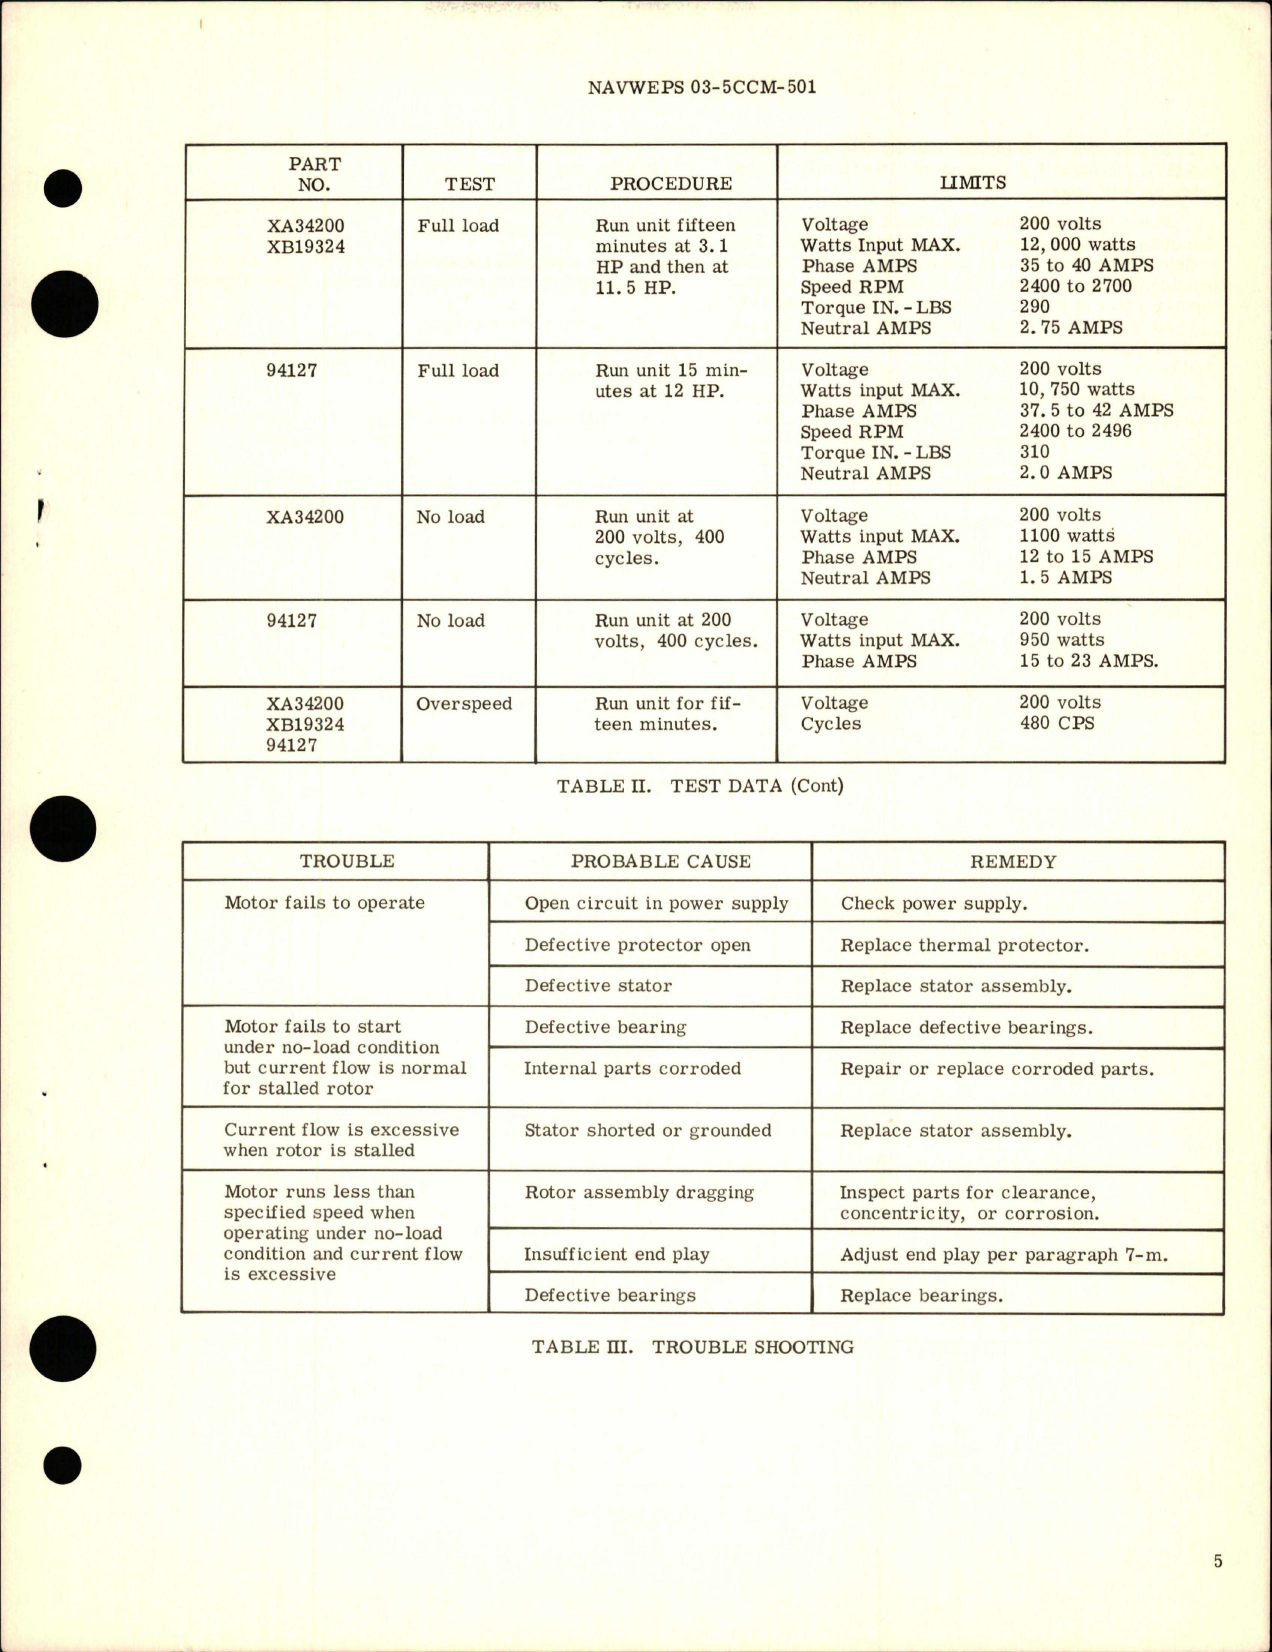 Sample page 5 from AirCorps Library document: Overhaul Instructions with Parts Breakdown for Geared Electrical Motors - Parts XA34200, XB19324, and 94127